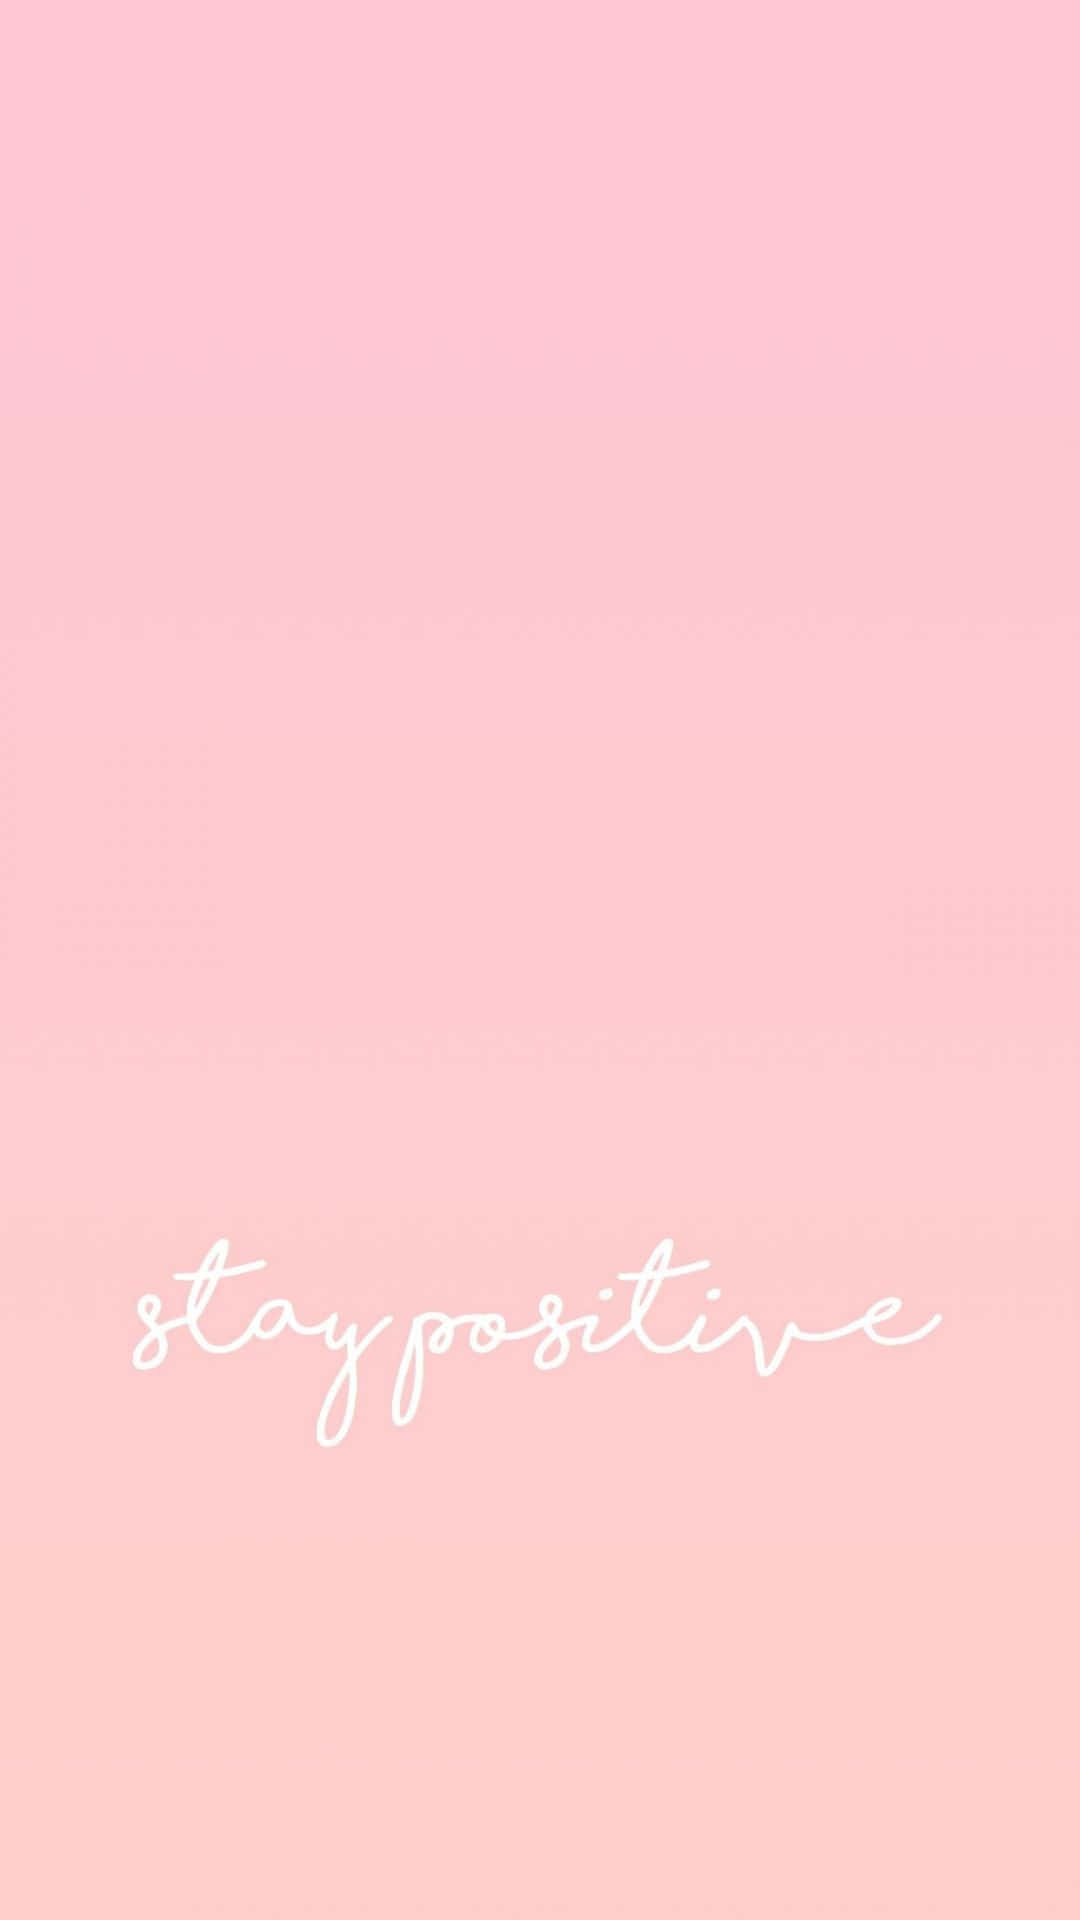 A Pink Background With The Words Stay Positive